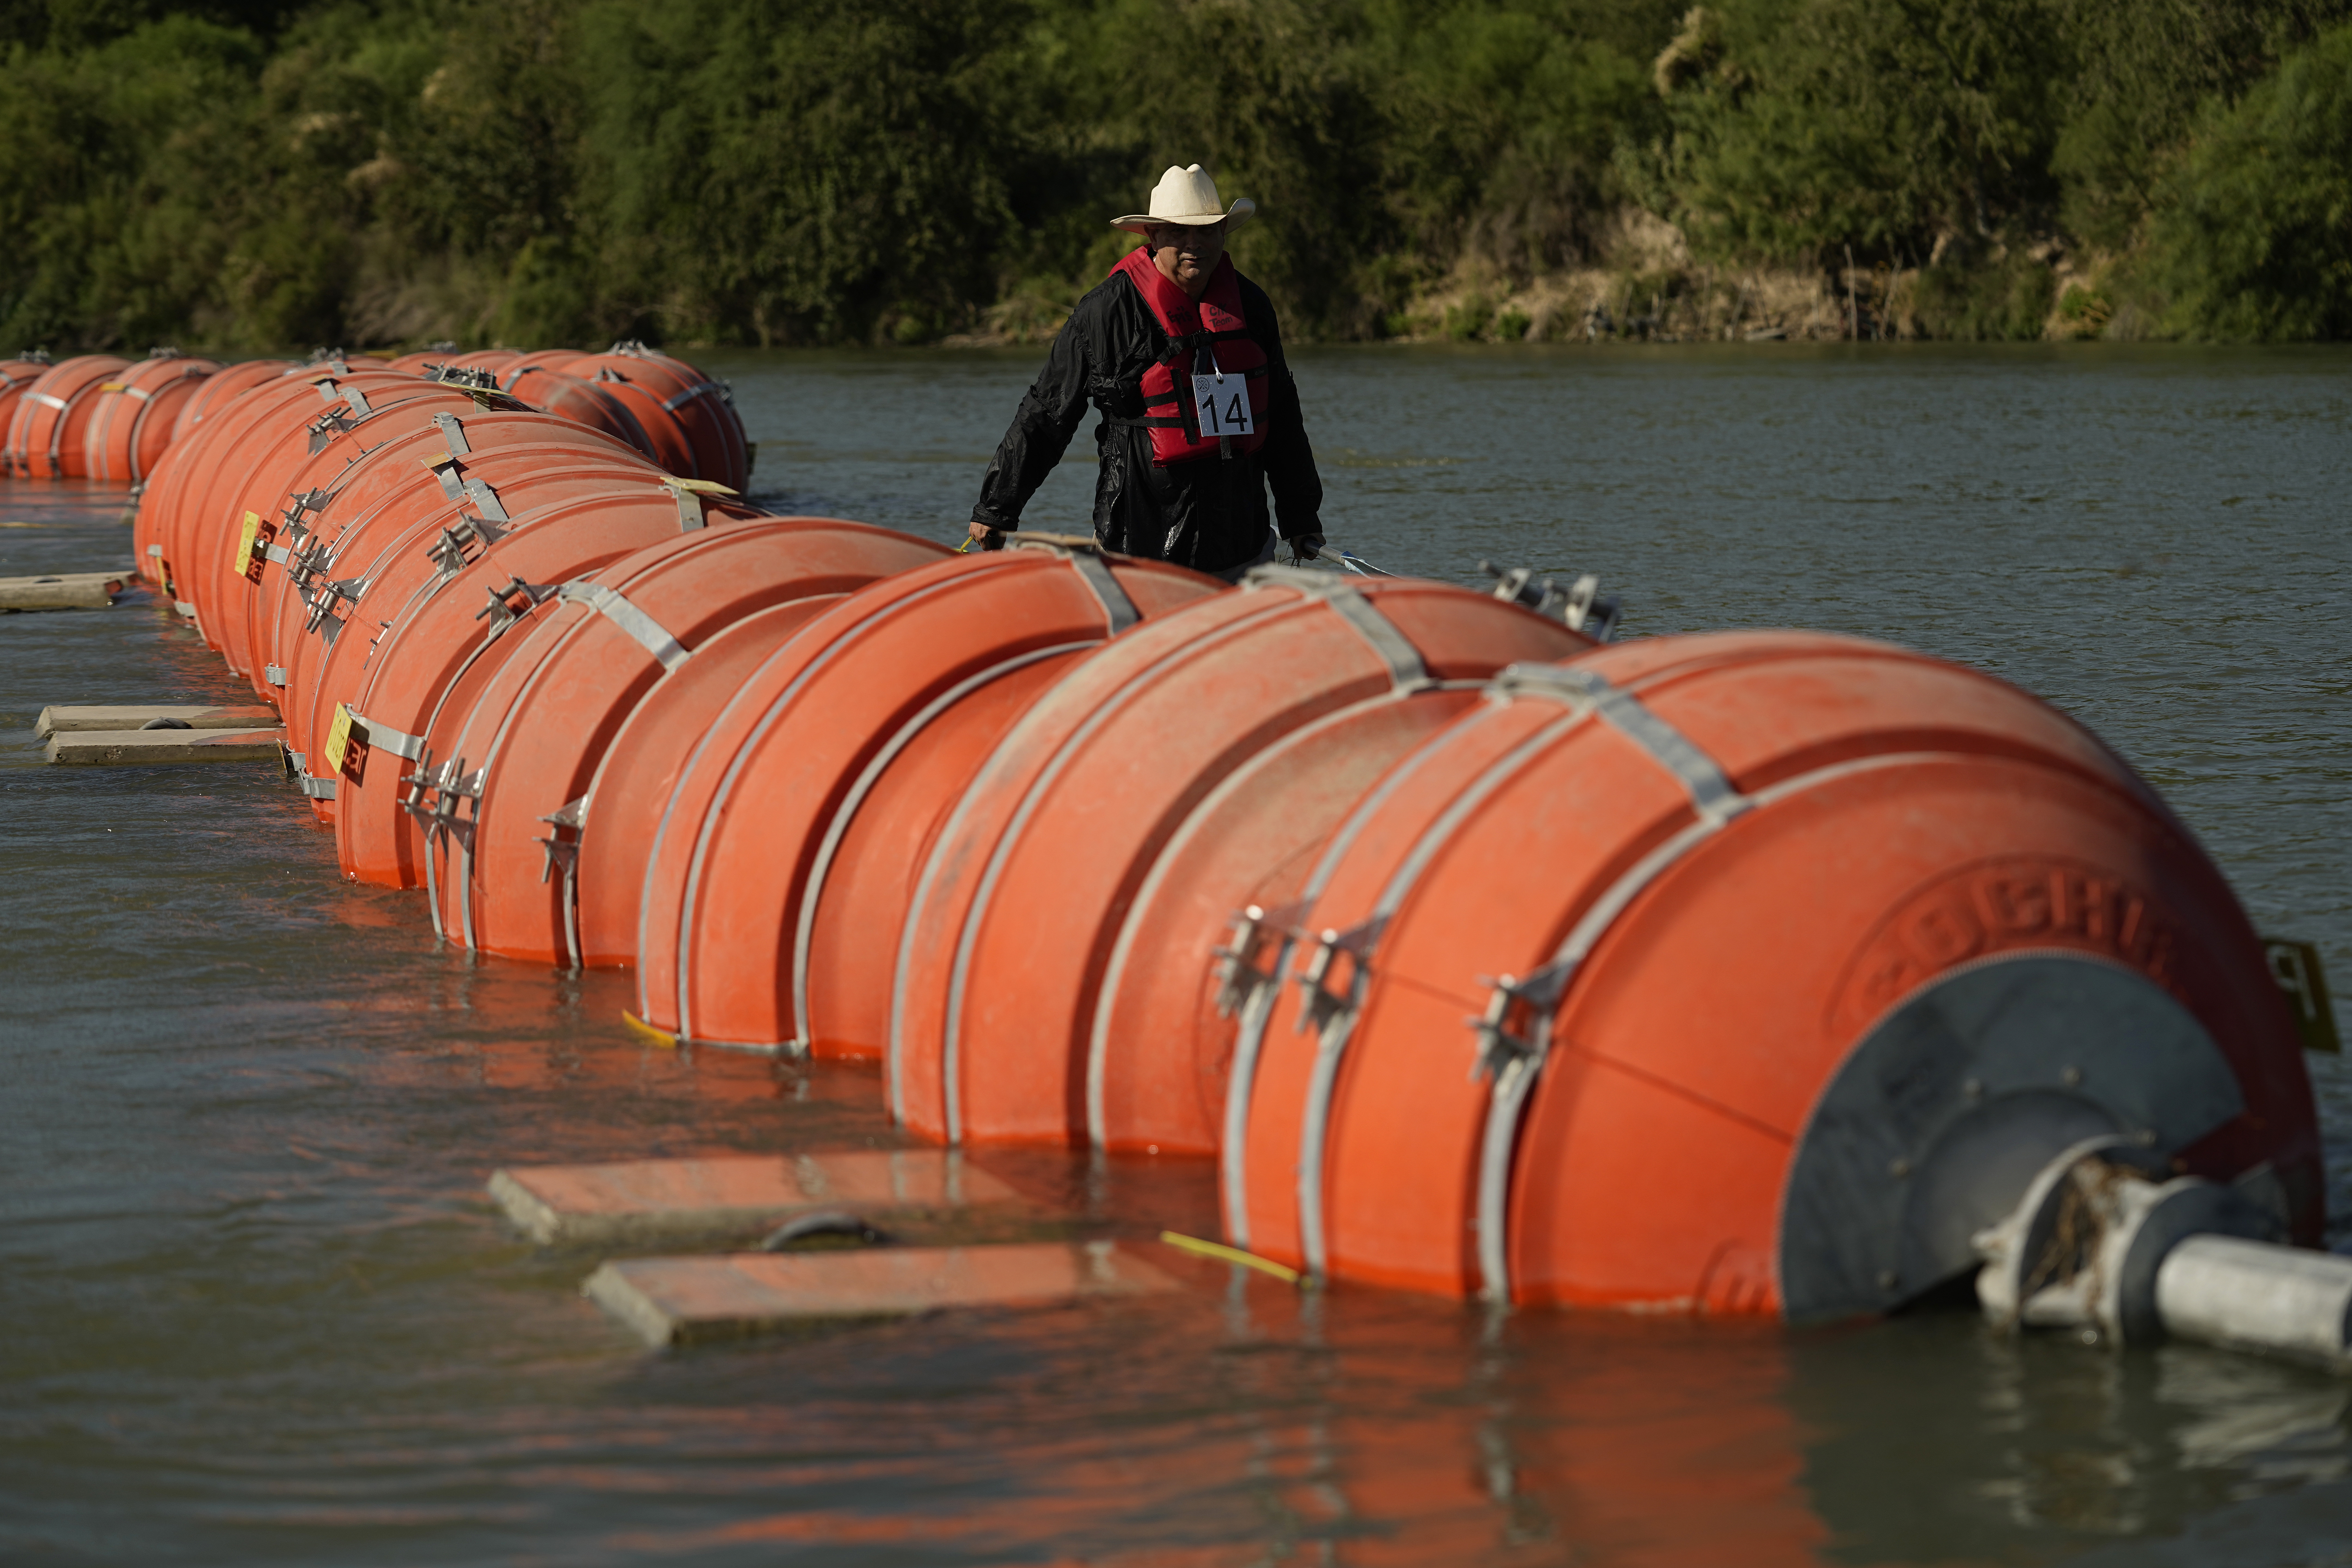 Judge orders Texas to move buoys from waters of US-Mexico border